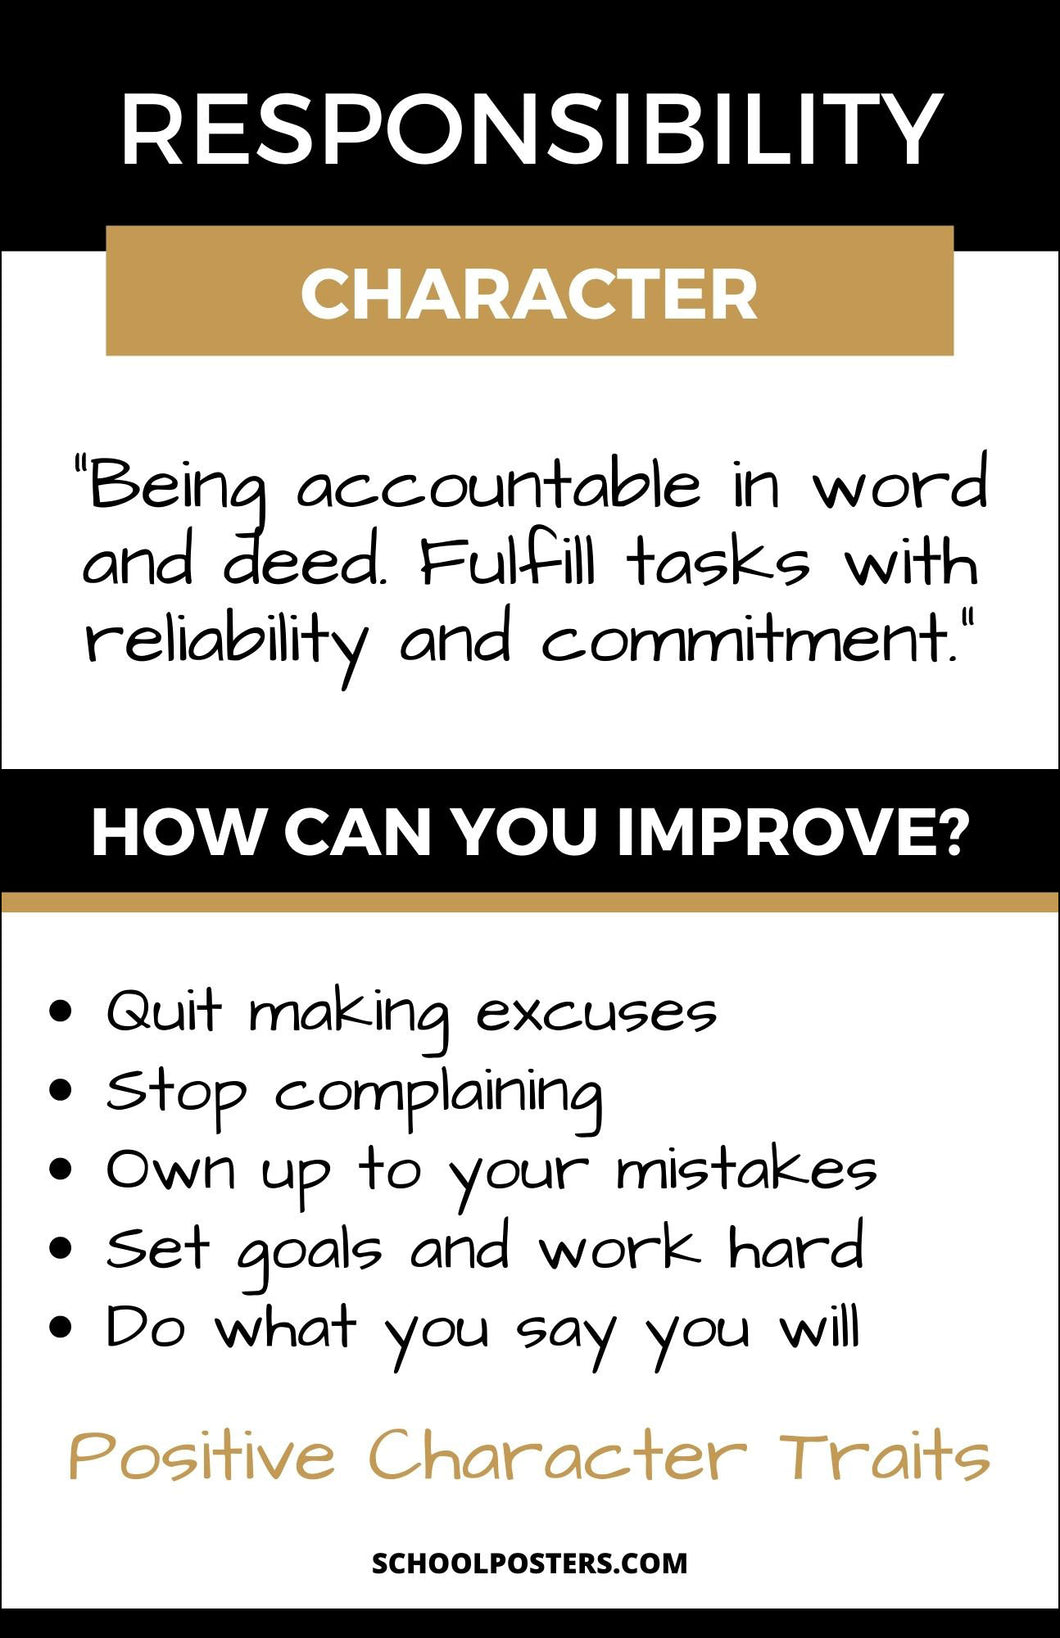 Responsibility Character Trait Poster